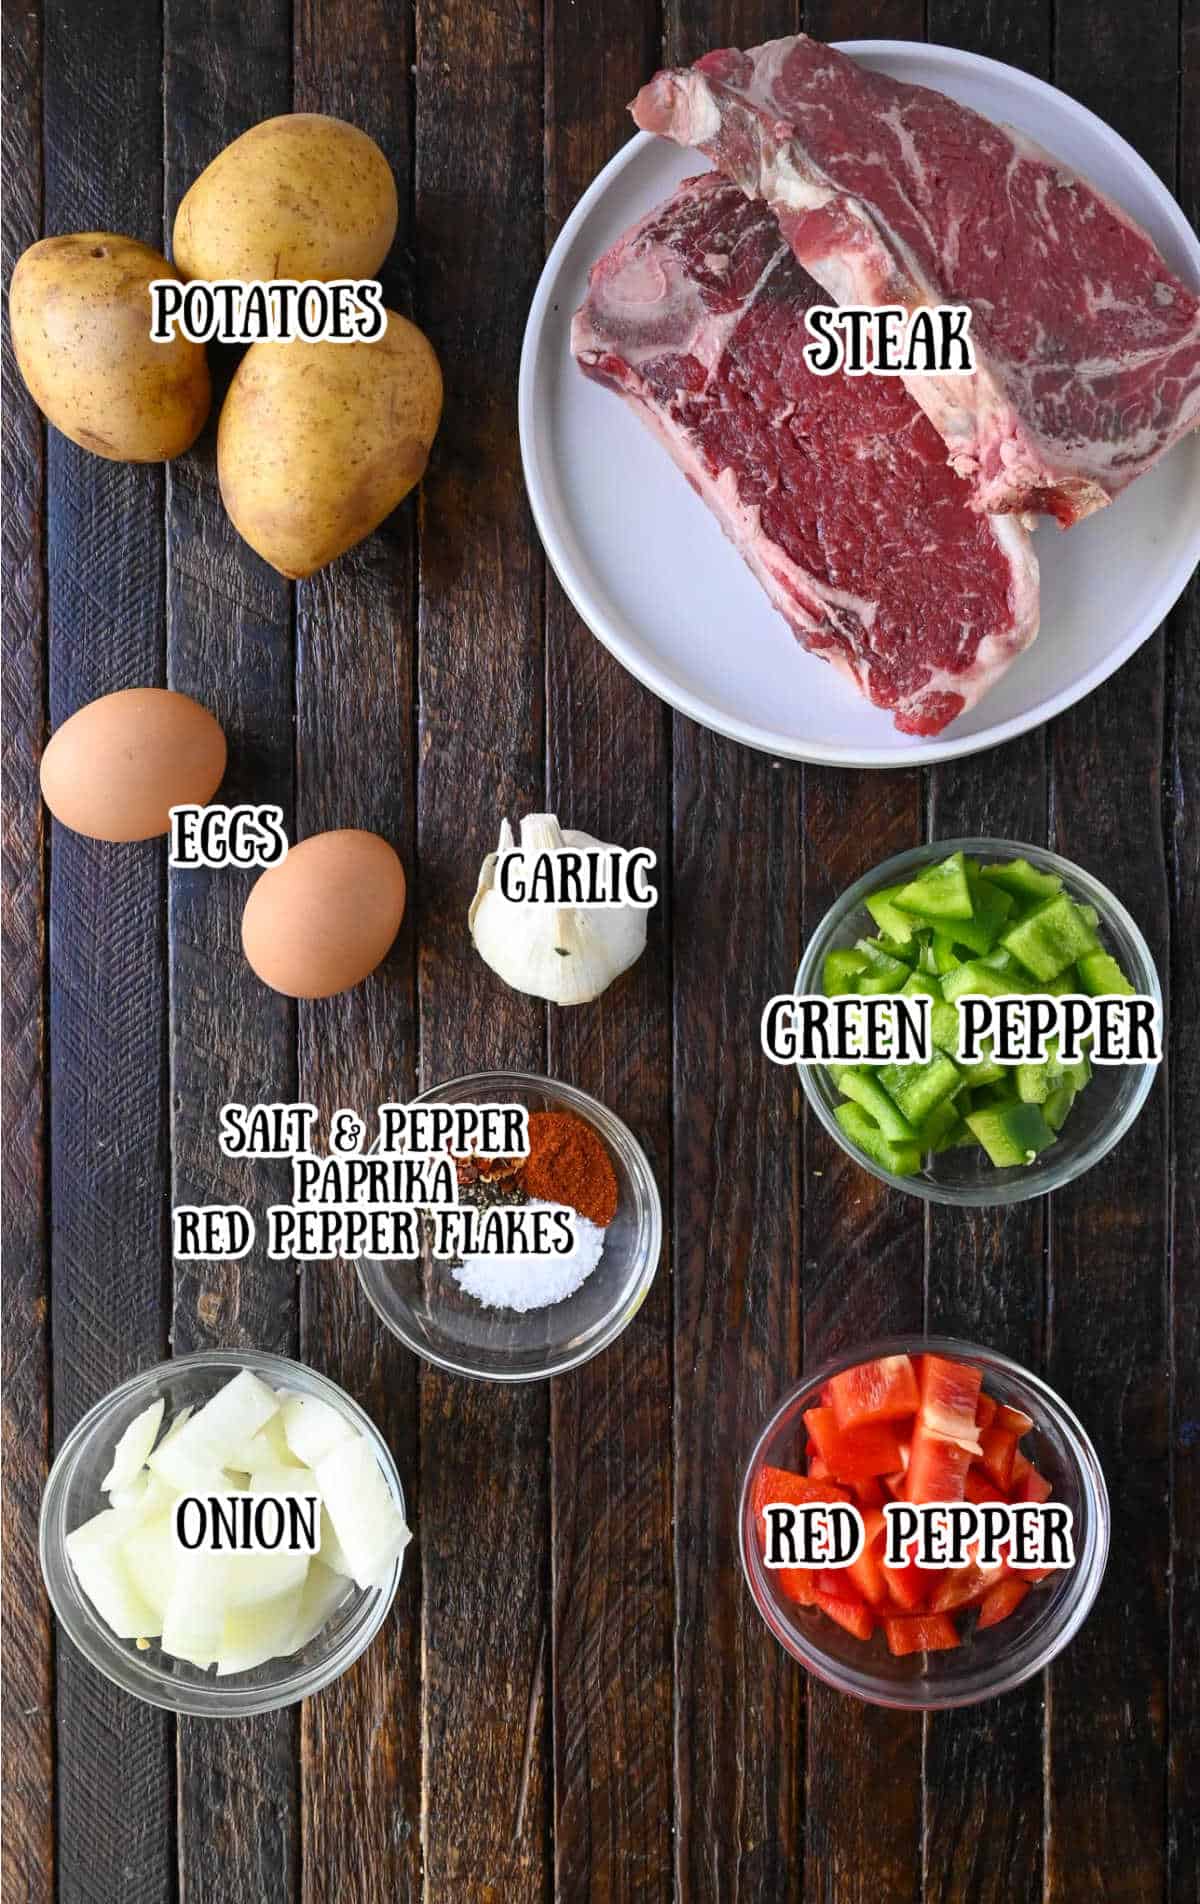 Labelled ingredients for steak and potato breakfast hash on a dark wooden countertop.